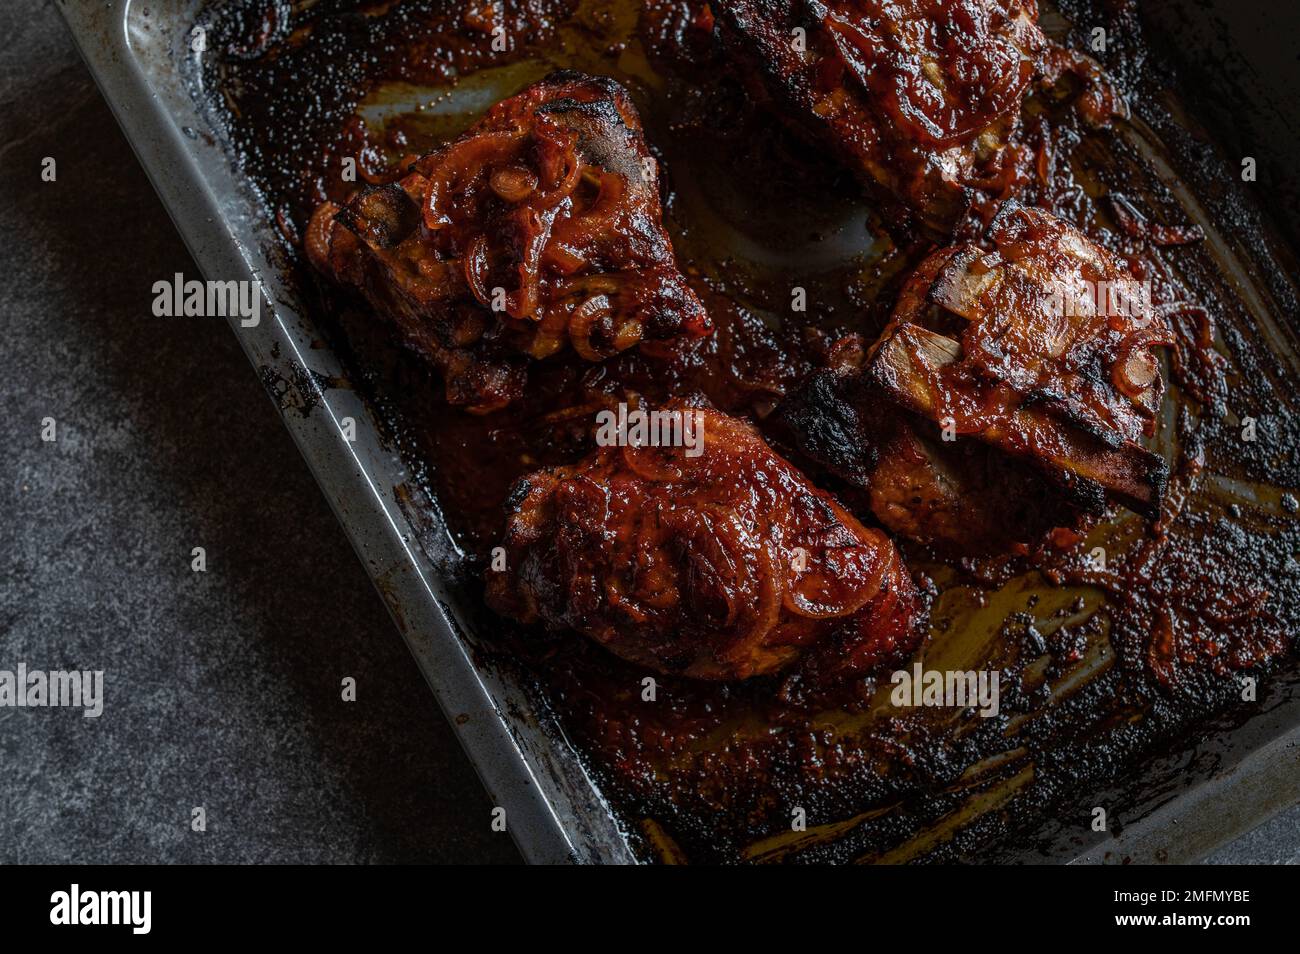 Barbecue pork thick ribs on a baking sheet isolated on dark background. Top view Stock Photo